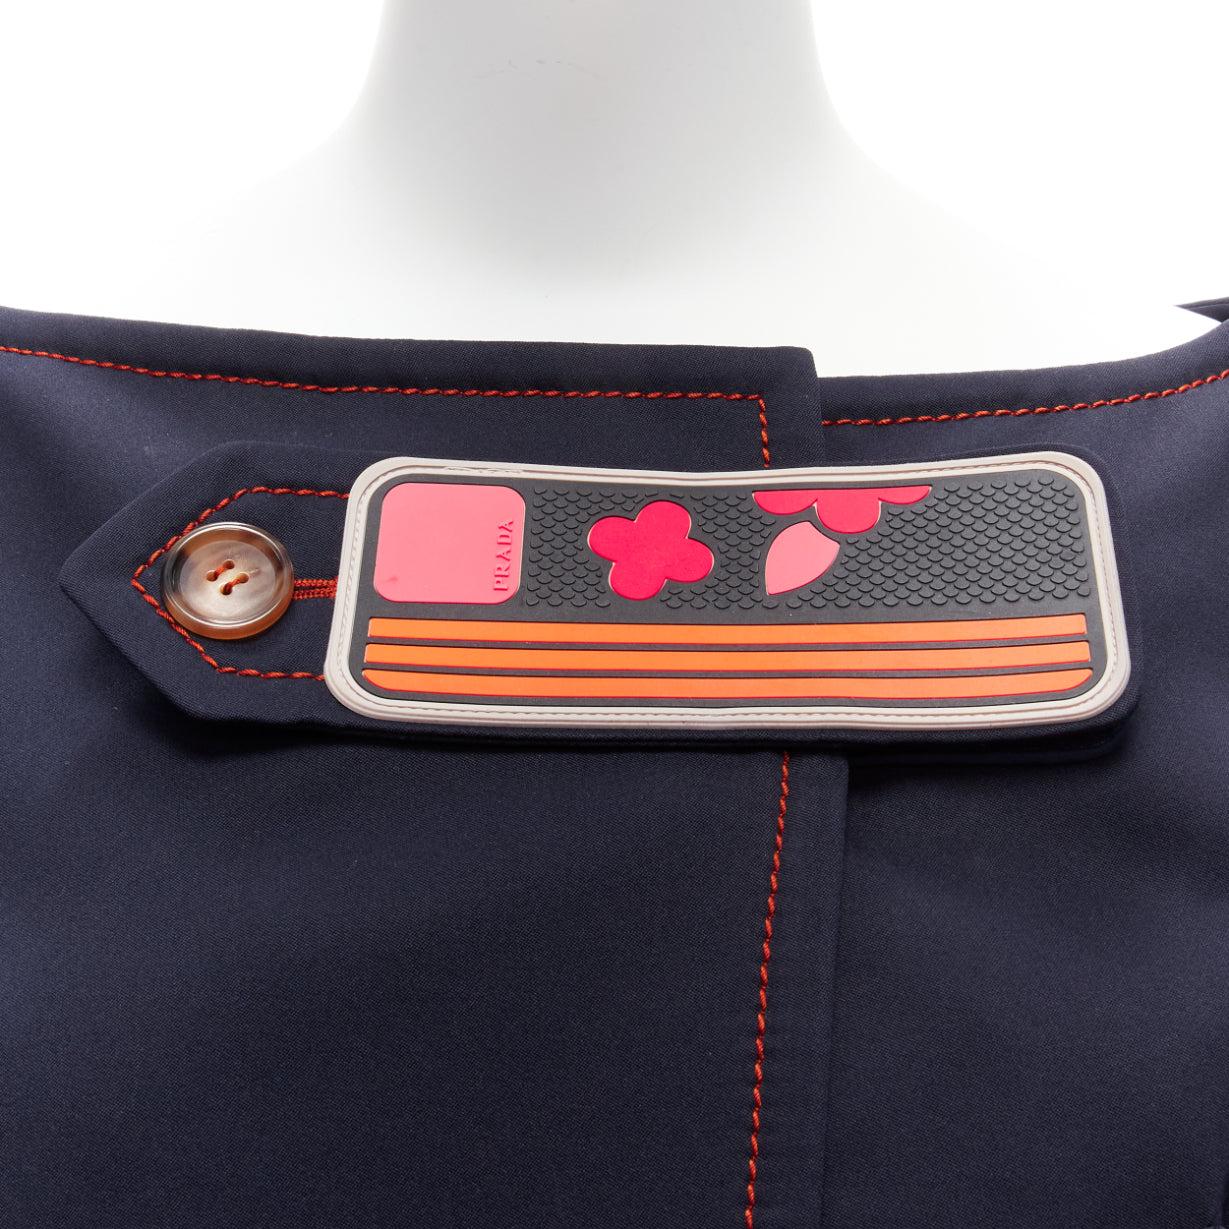 PRADA 2017 orange pink logo rubber patch navy cream piping bateau cropped jacket IT40 S
Reference: TGAS/D00618
Brand: Prada
Designer: Miuccia Prada
Collection: SS 2017
Material: Polyester
Color: Navy, Multicolour
Pattern: Solid
Closure: Magic